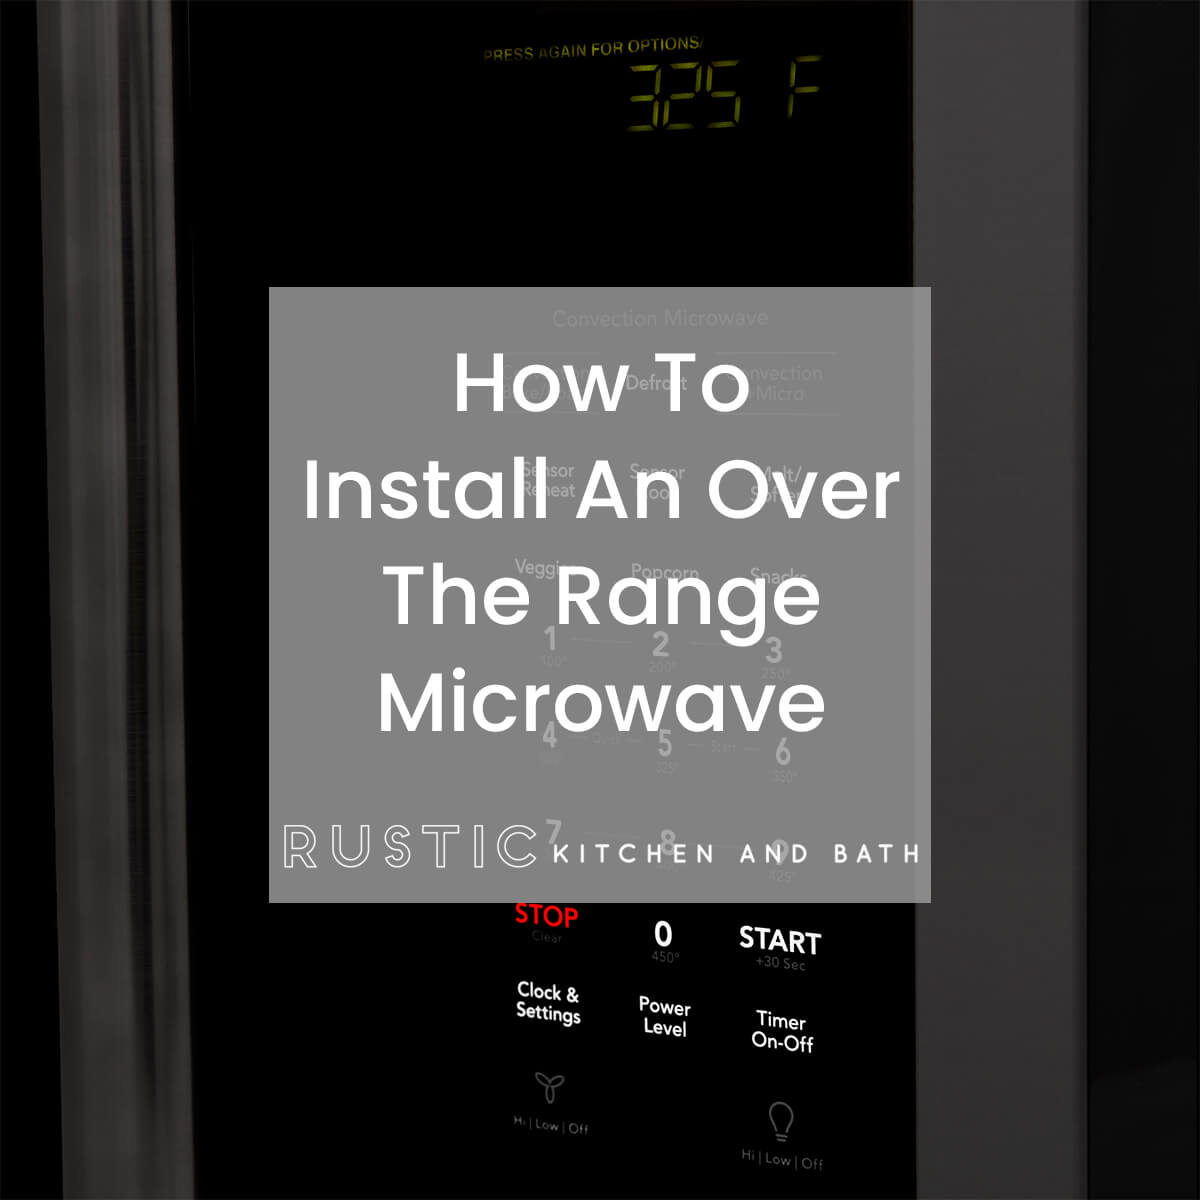 How to Install an Over The Range Microwave